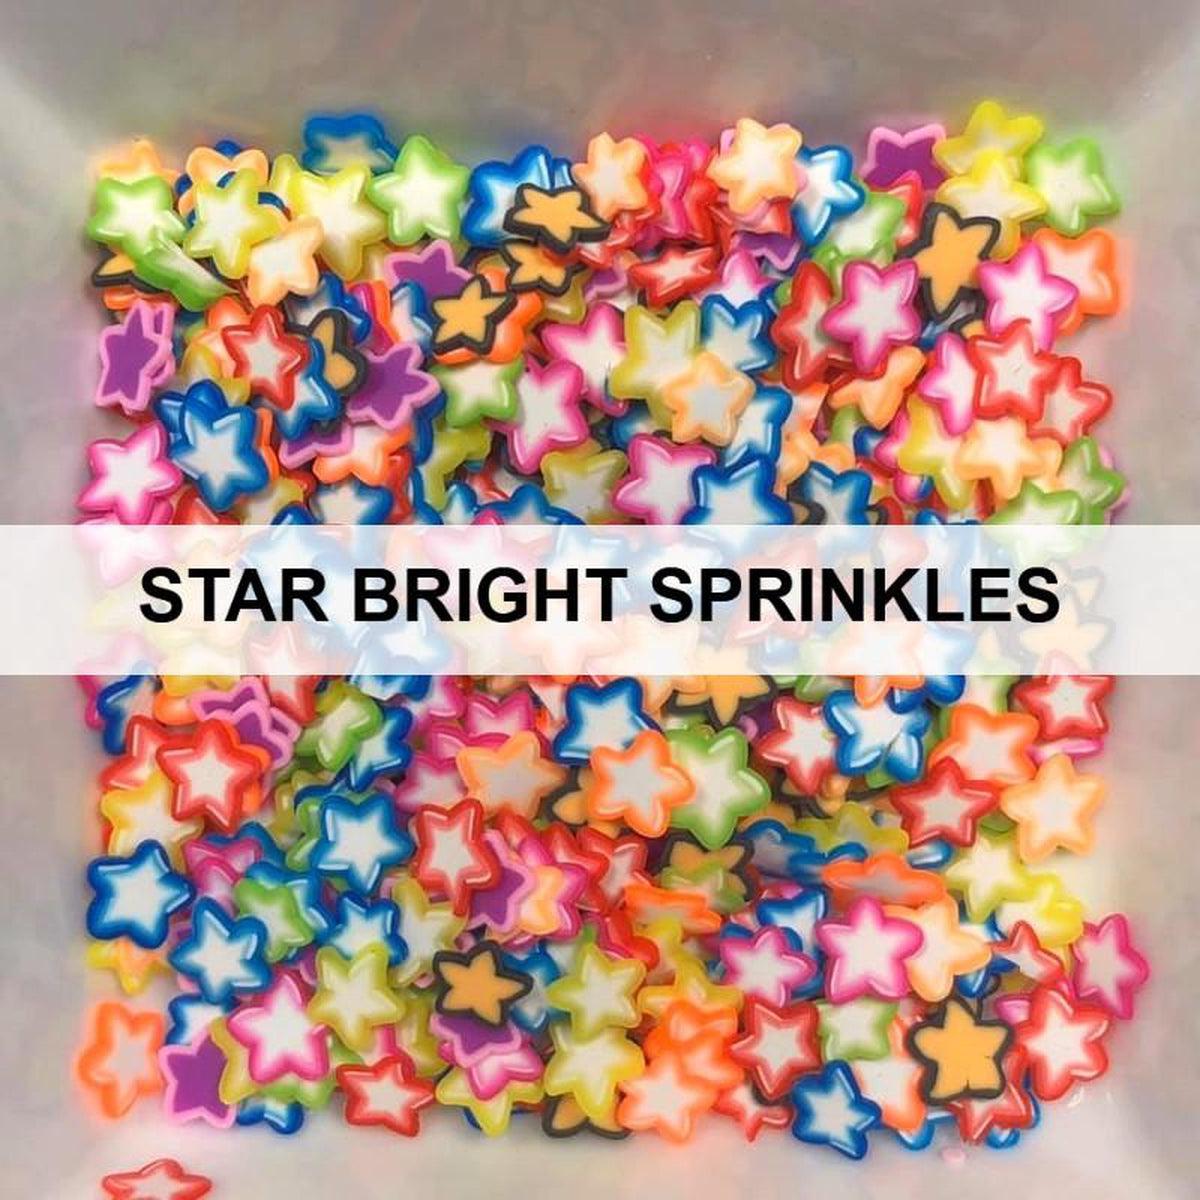 Star Bright Sprinkles by Kat Scrappiness - Kat Scrappiness